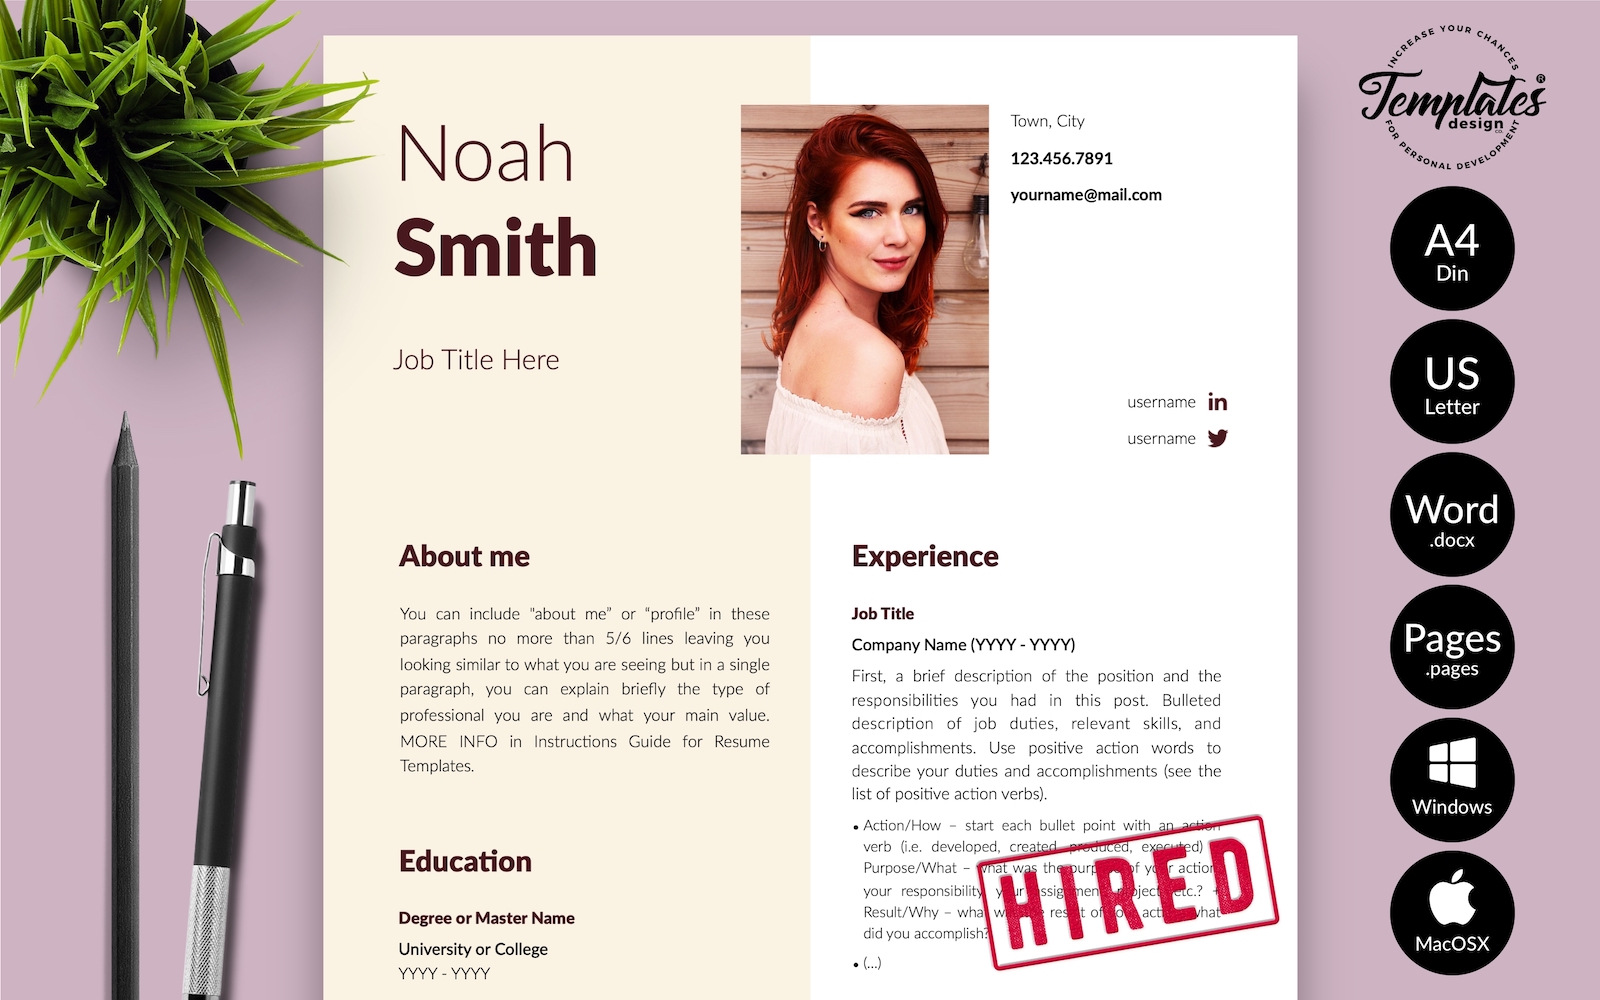 Noah Smith - Creative CV Resume Template with Cover Letter for Microsoft Word & iWork Pages